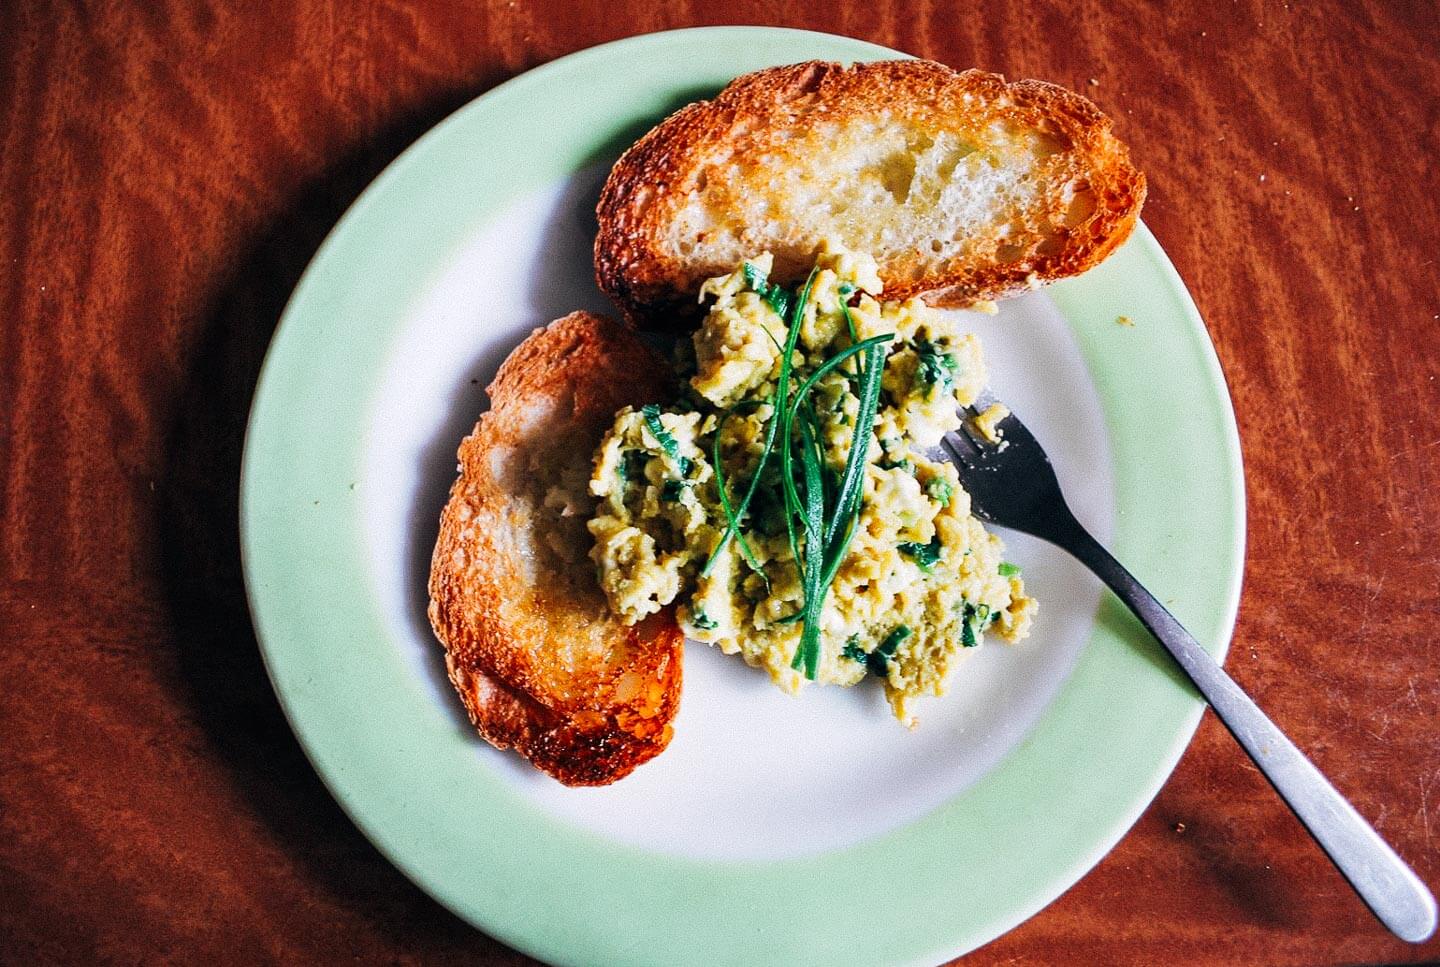 Slow-cooked scrambled eggs require patience, but reward the eater with exceptional flavor. These slow-cooked scrambled eggs are mixed with ricotta, Parmesan, garlic scapes, and spring onions, but feel free to add whatever cheese and alliums you may have on hand. 